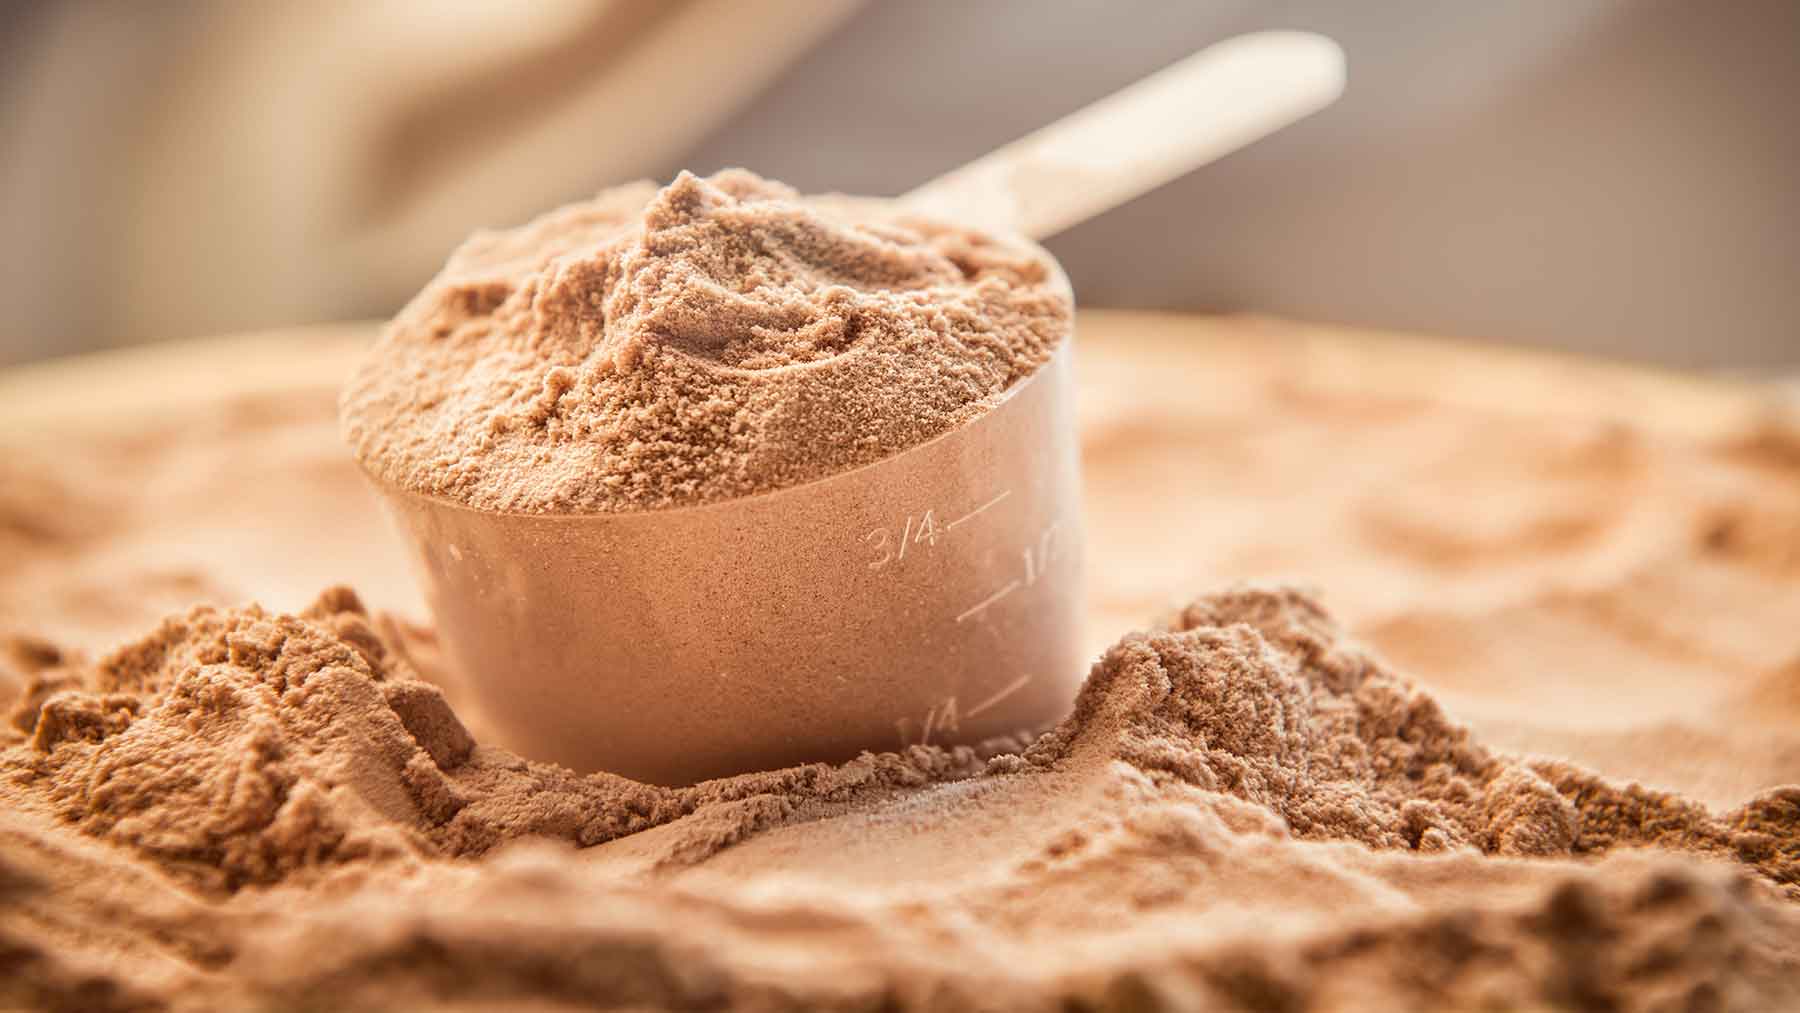 Top 3 Best Protein Powders in India